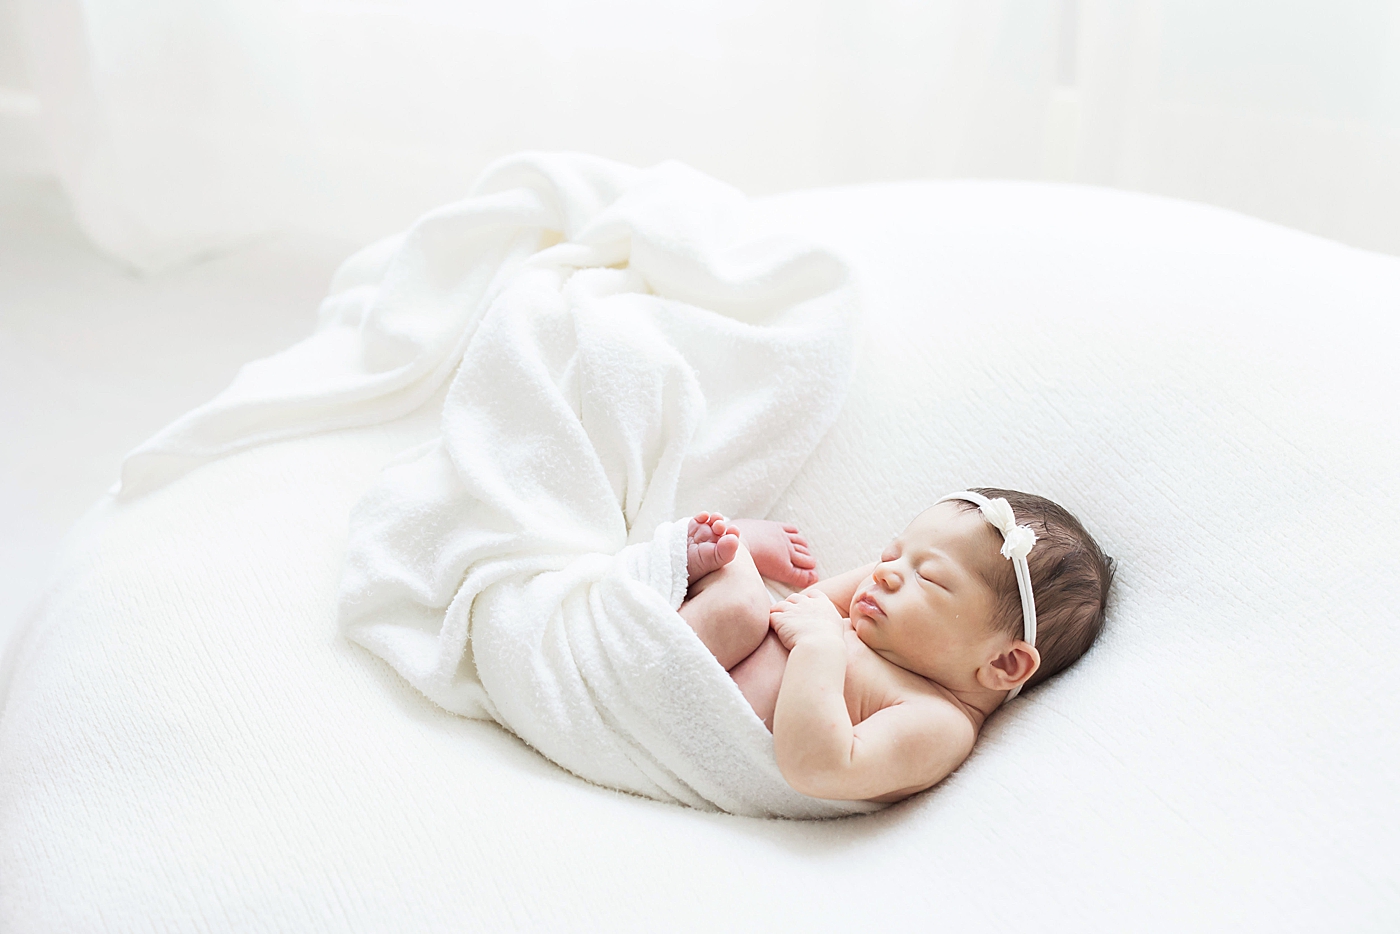 Newborn baby girl in all white. Photo by Fresh Light Photography.